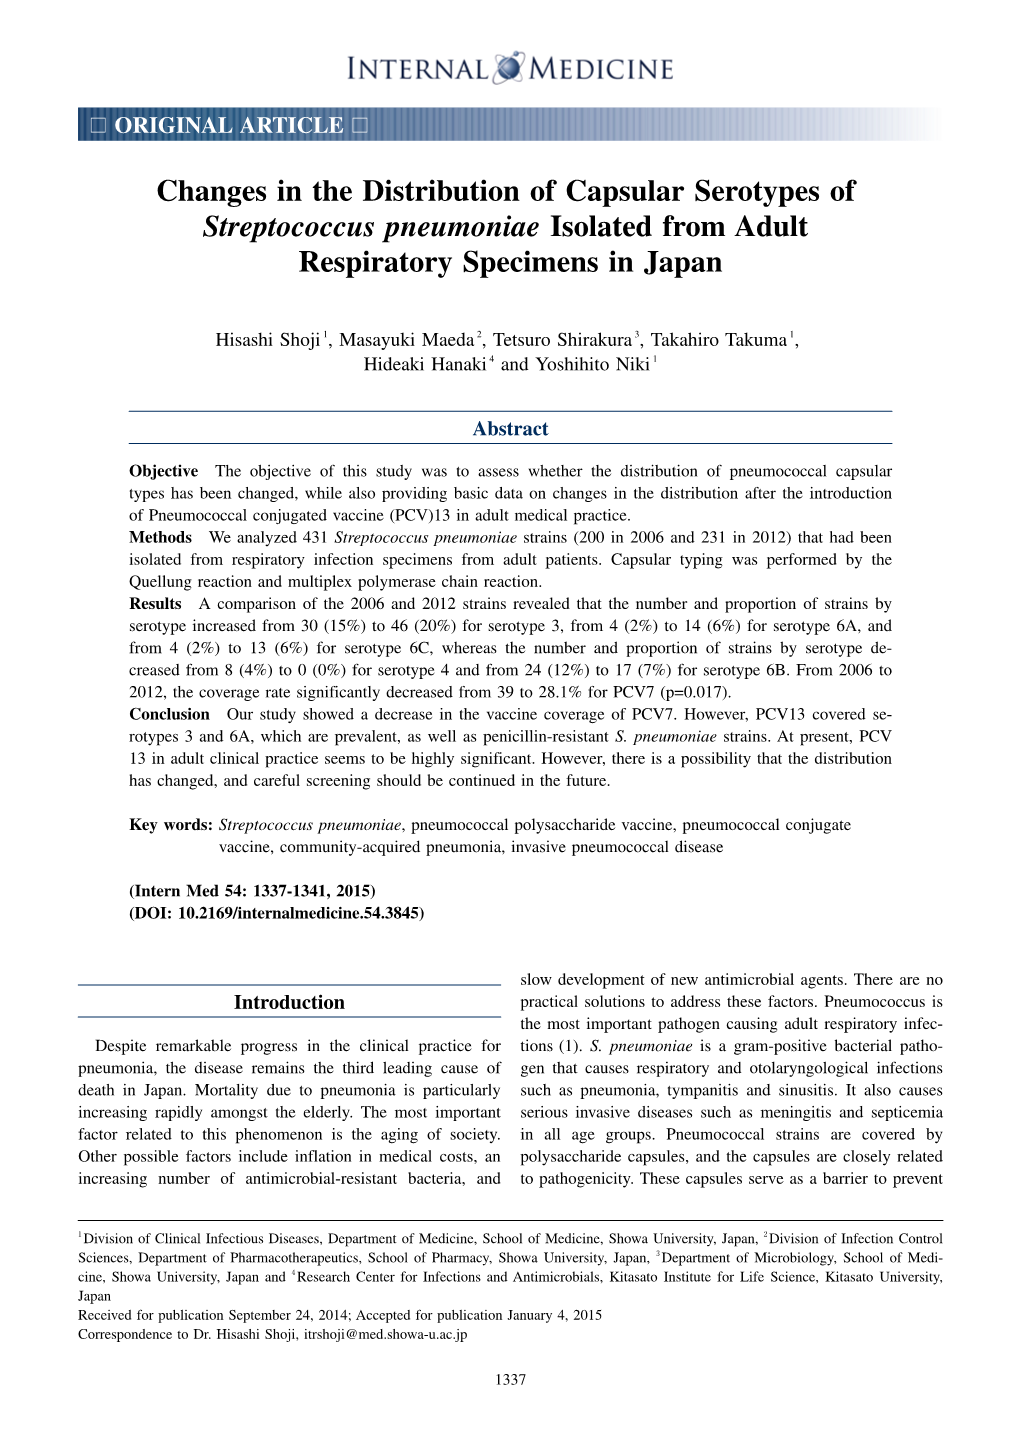 Changes in the Distribution of Capsular Serotypes of Streptococcus Pneumoniae Isolated from Adult Respiratory Specimens in Japan